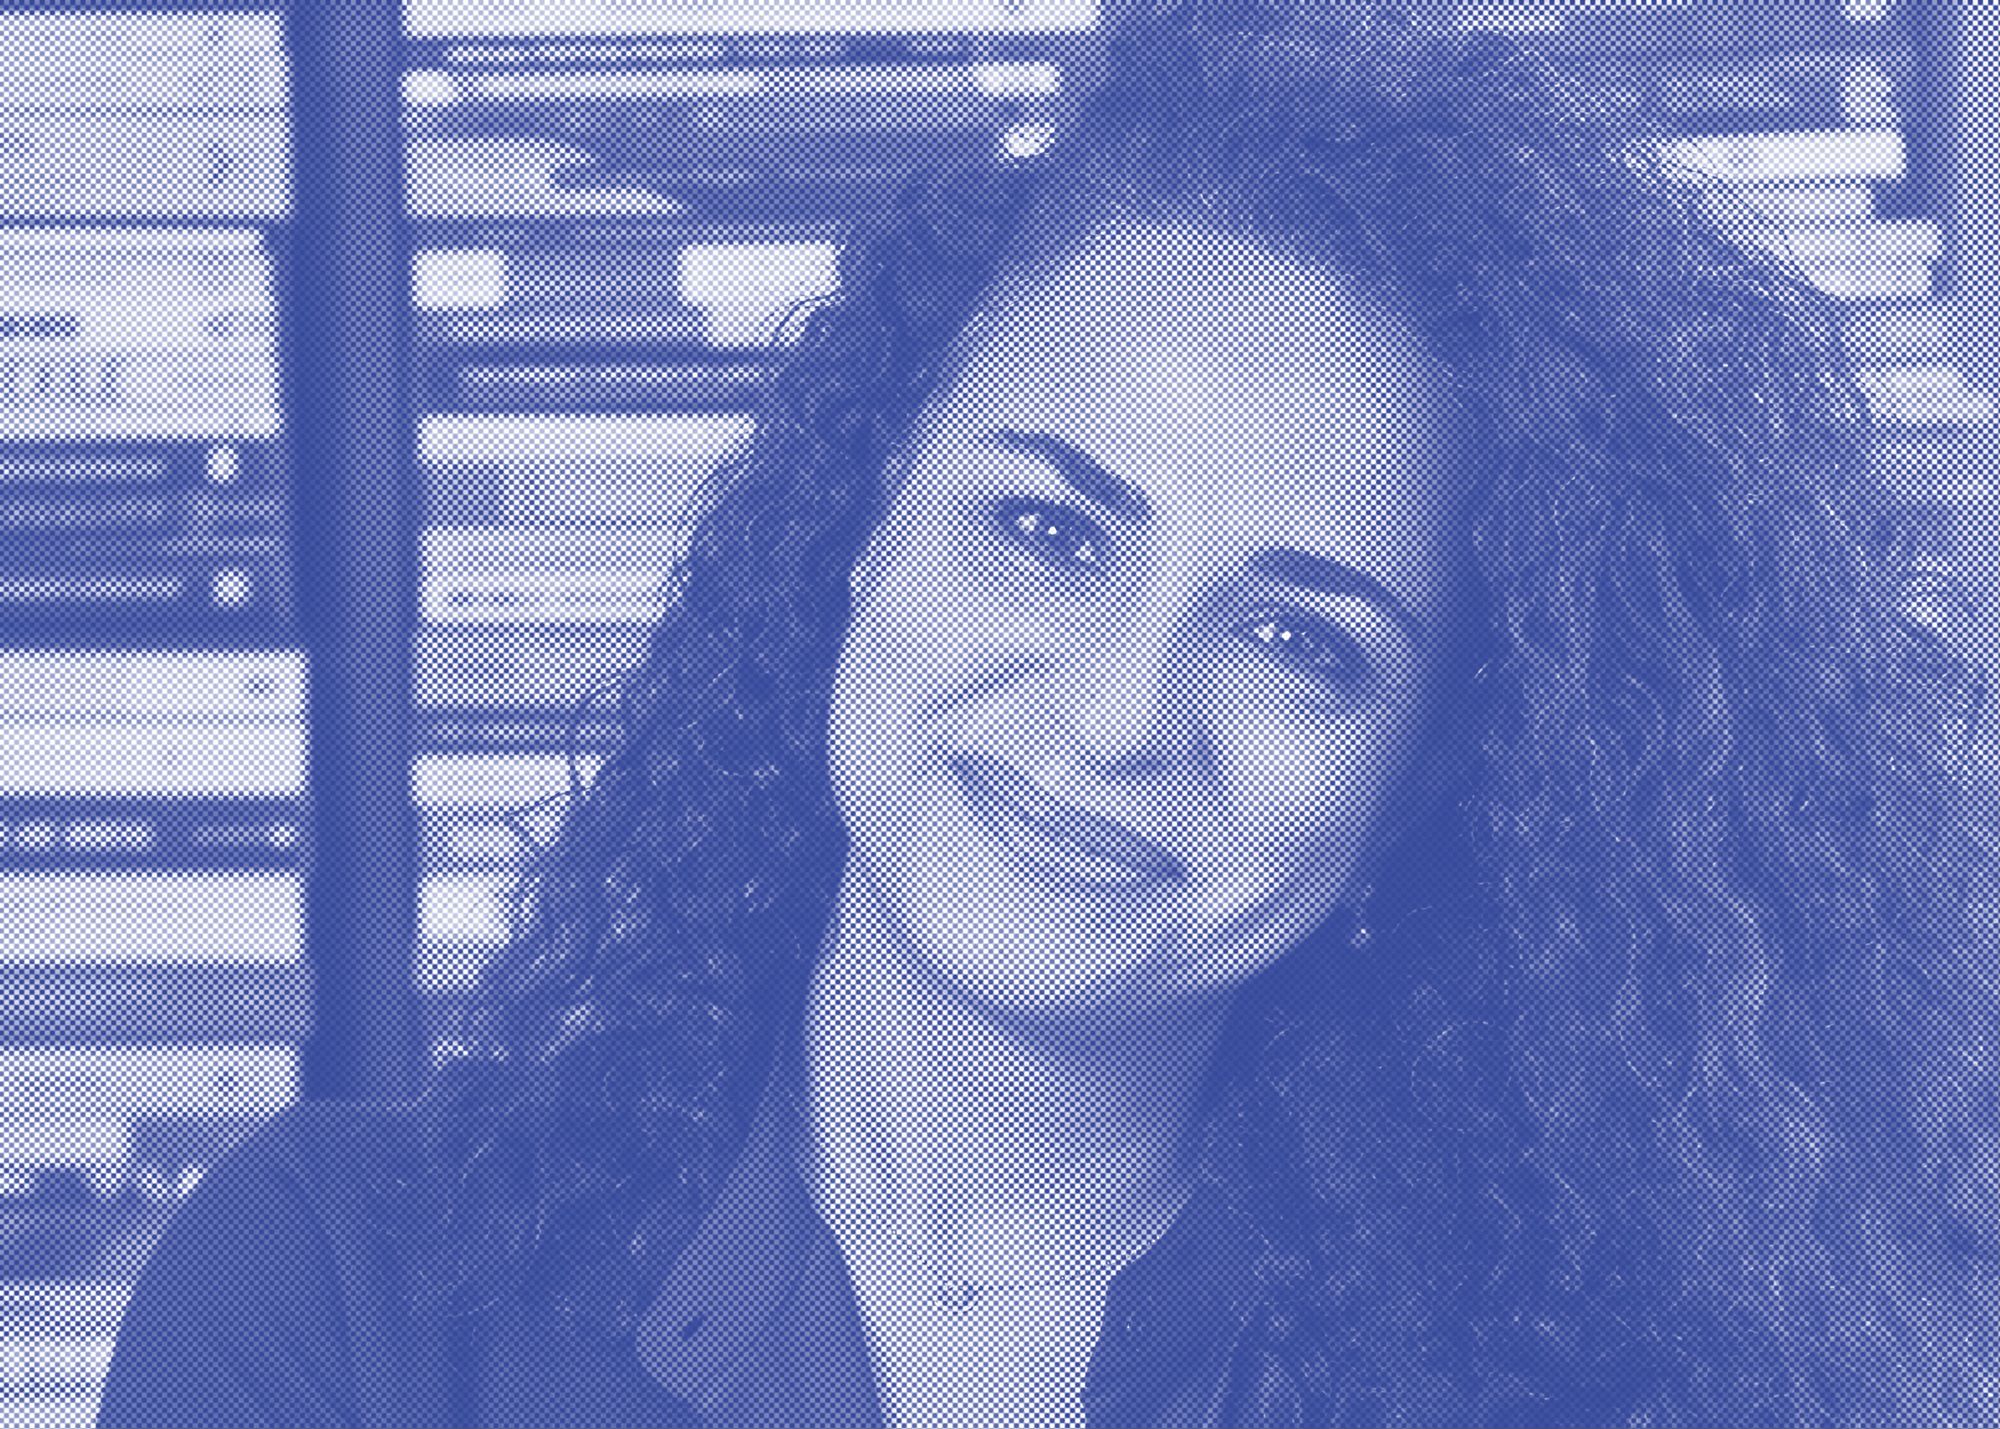 Every act of reading is historical,’ Nadia Wassef on the art of reading vs. the craft of writing, and the business of founding Diwan, one of Egypt’s most popular modern book stores